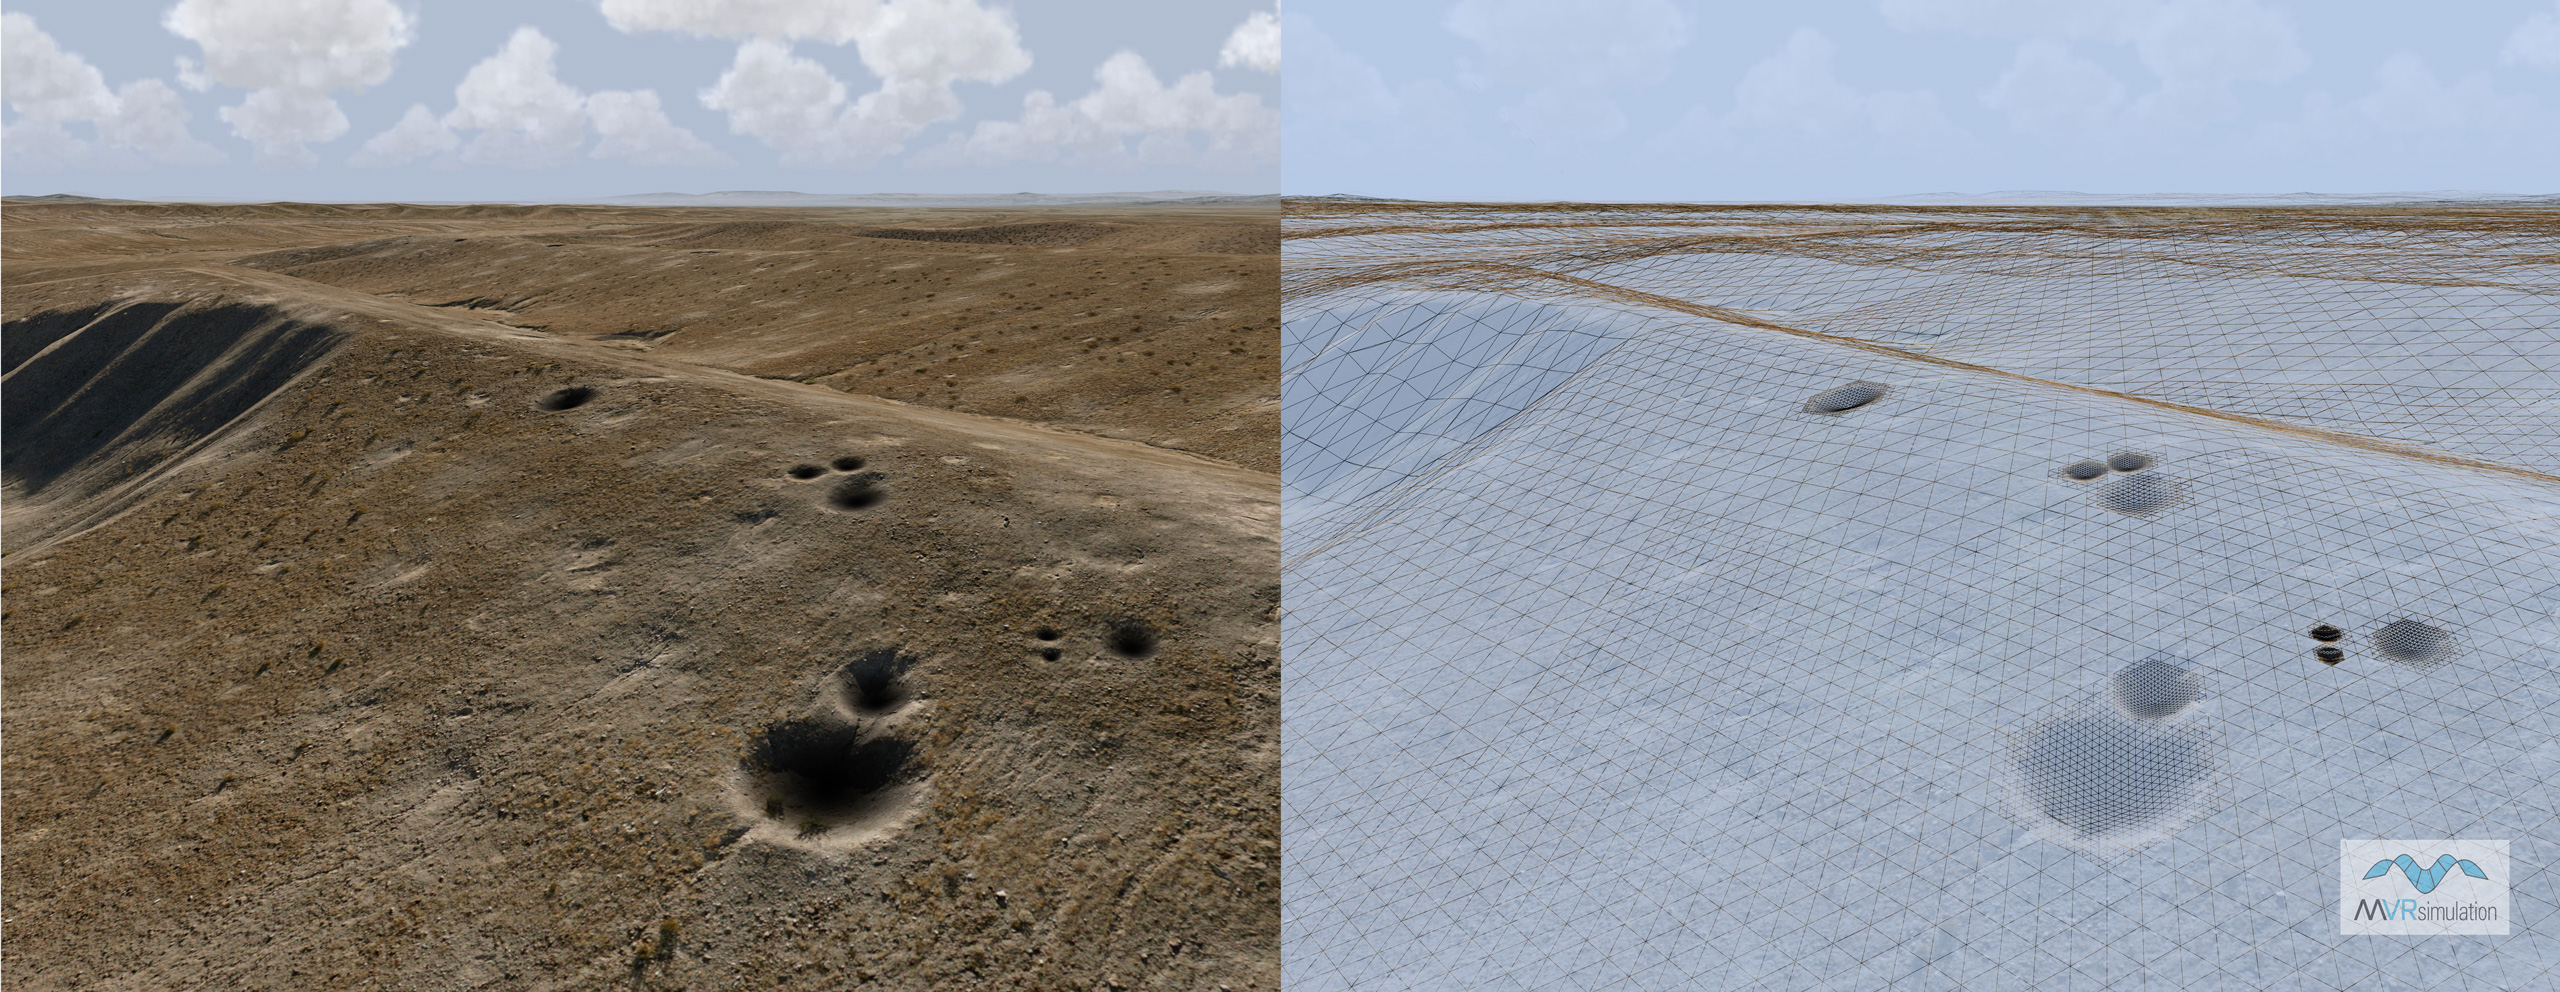 MVRsimulation VRSG real-time scenes of textured and wireframe views of craters created from a particle effects explosion. The scenes are rendered on 2 cm per-pixel resolution virtual terrain of the Prospect Square area at the U.S. Army Yuma Proving Ground, AZ. The terrain was built with 2 cm imagery collected by MVRsimulation’s small UAV.